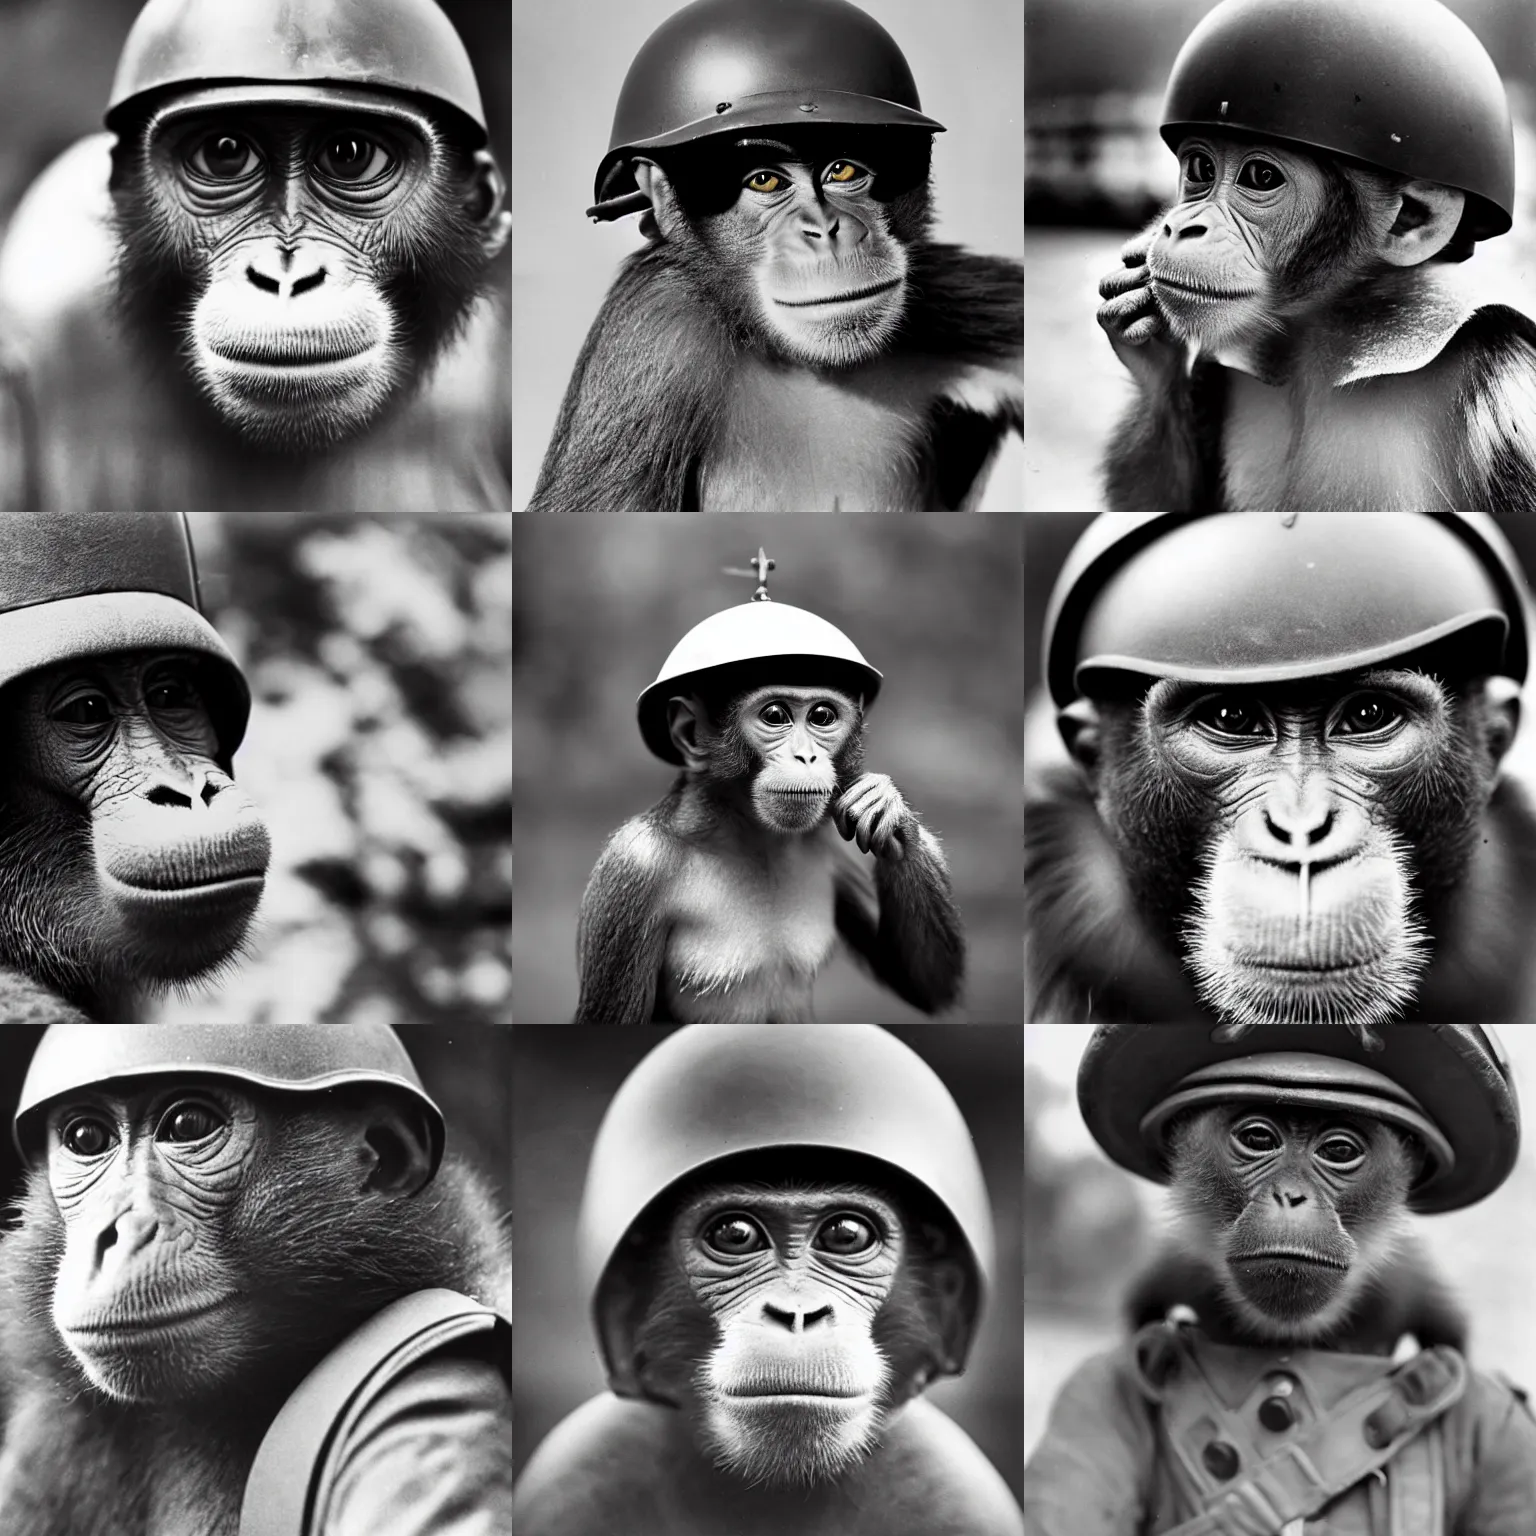 Prompt: Close up of a monkey wearing soldier helmet in the battle, ww2 historical photography, black & white